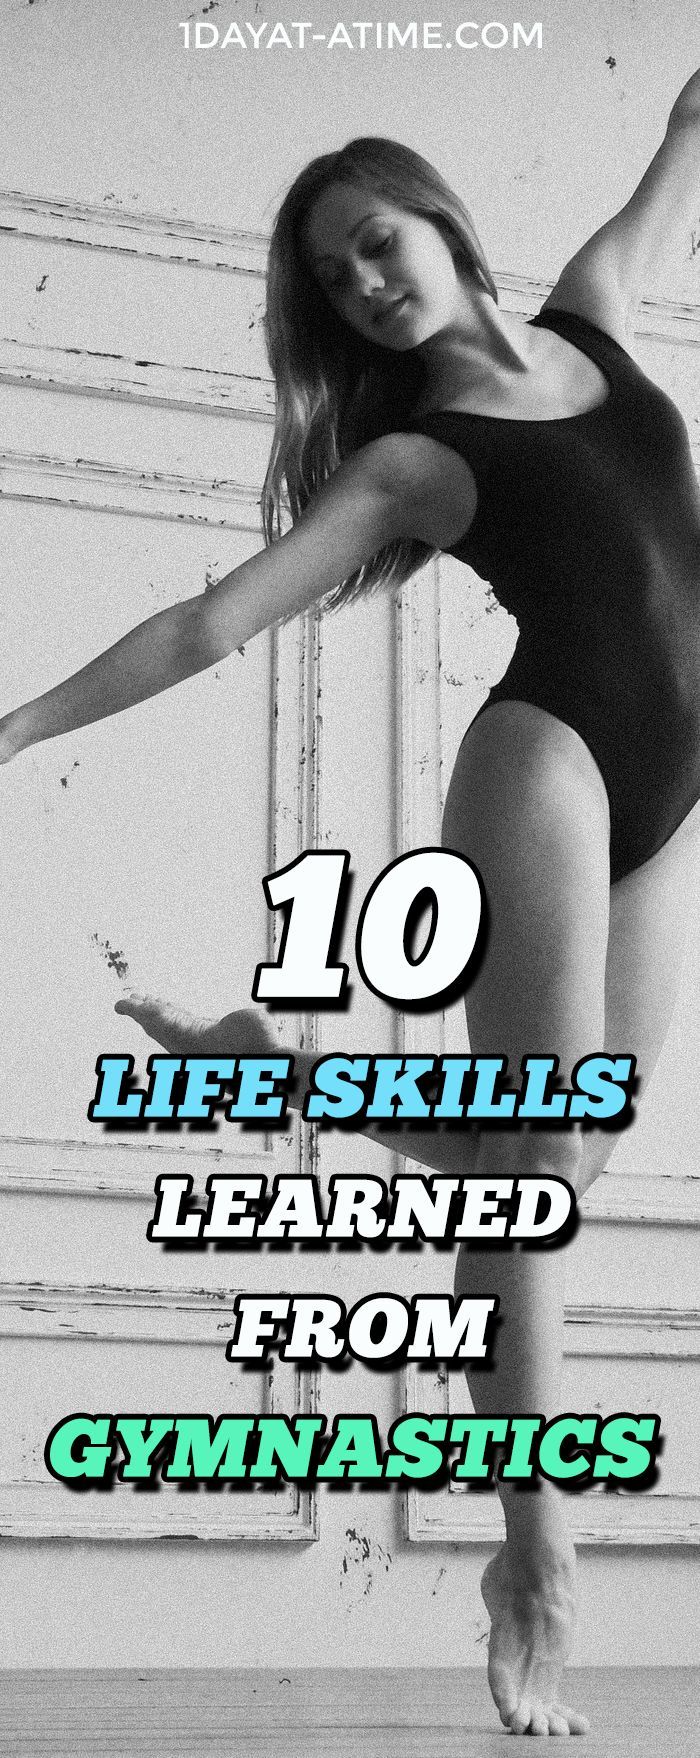 Life Skills Learned From Gymnastics #Gymnastics is the #bestsport for overall #b...